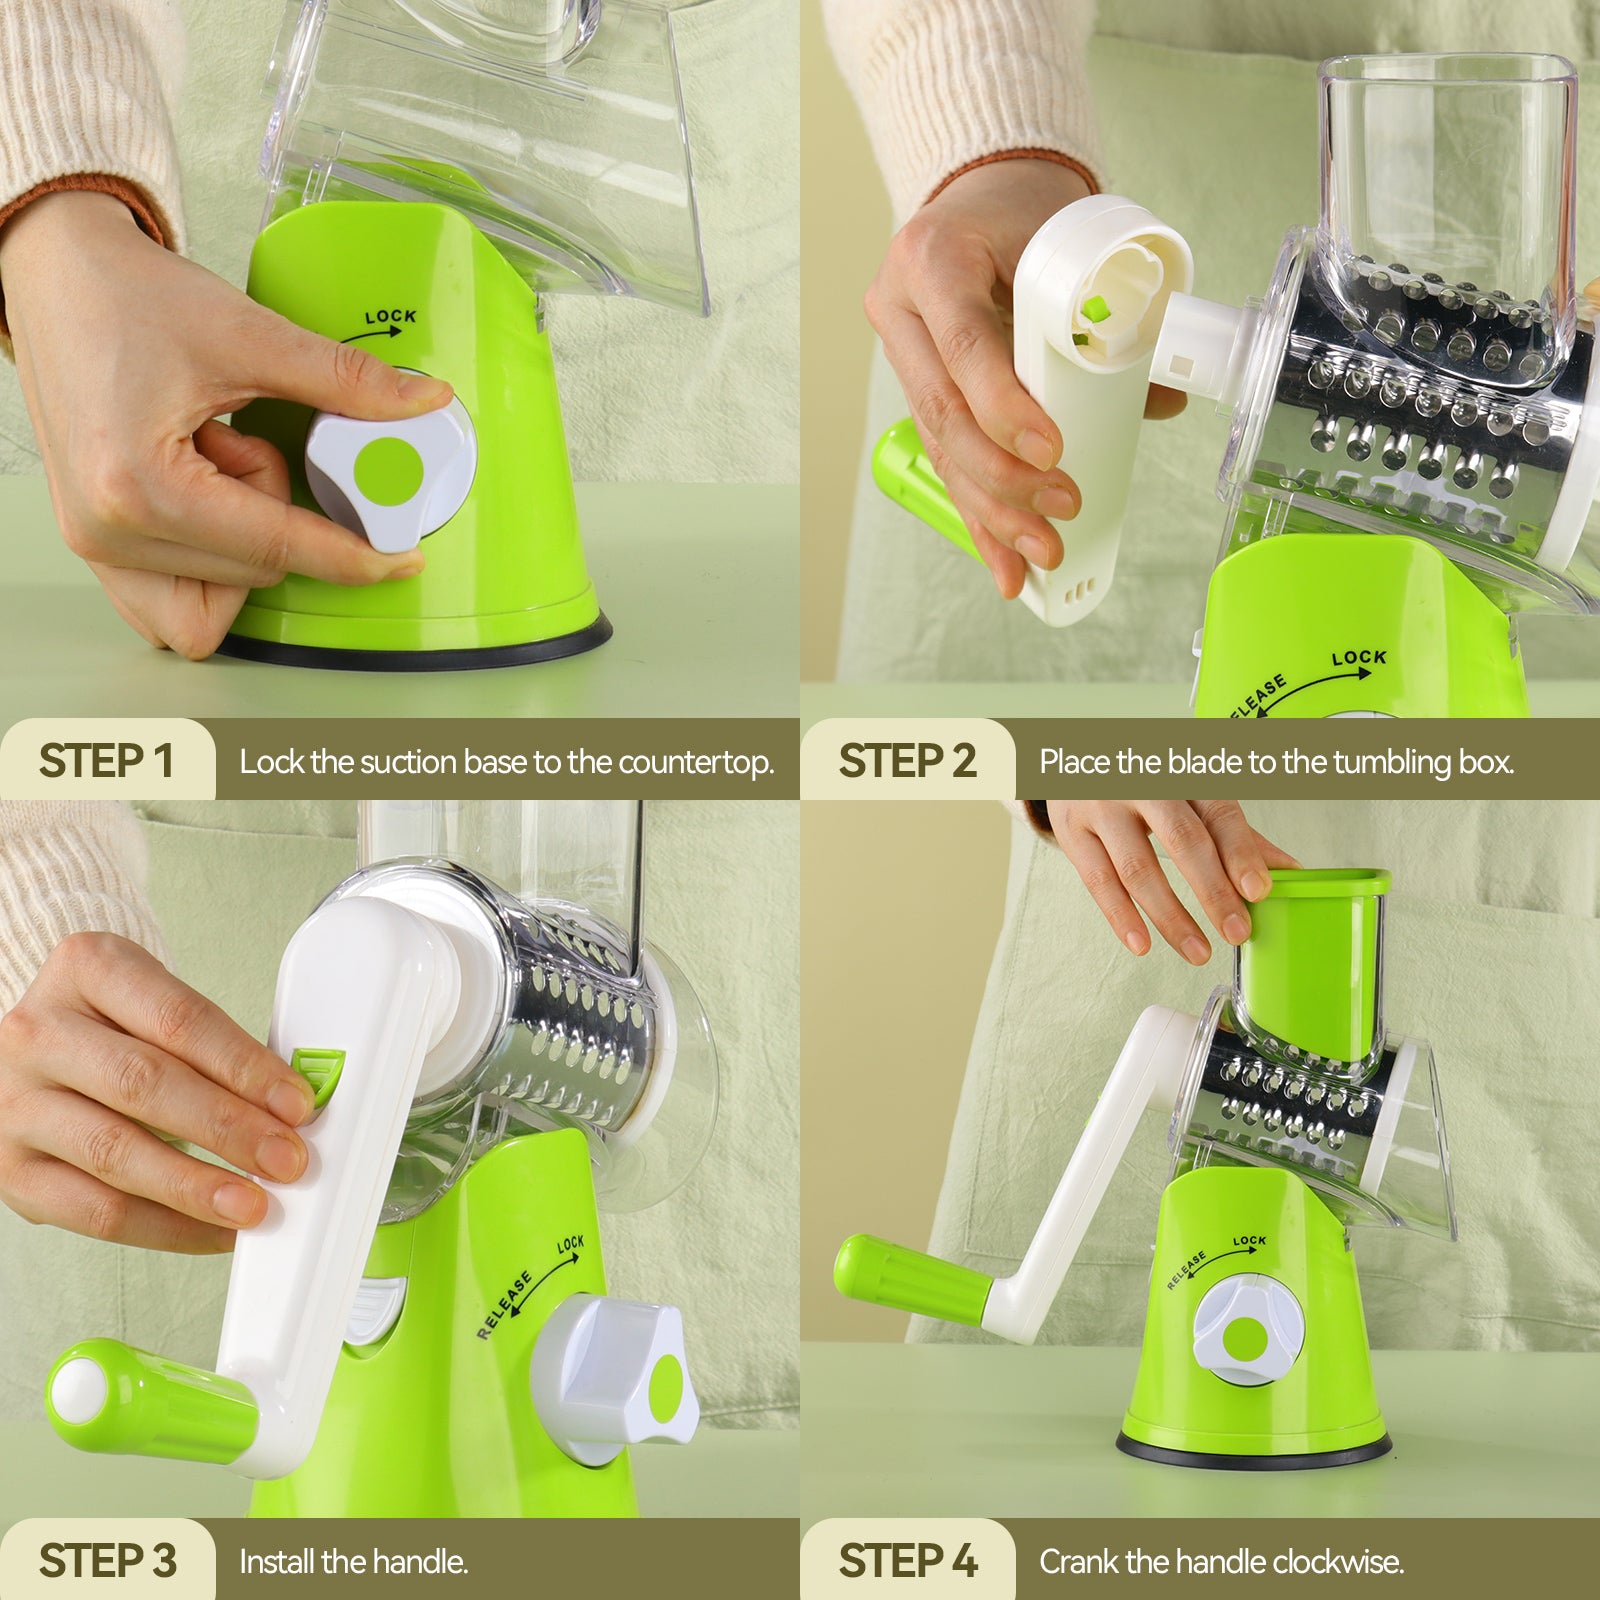 3 in1 Rotary Grater